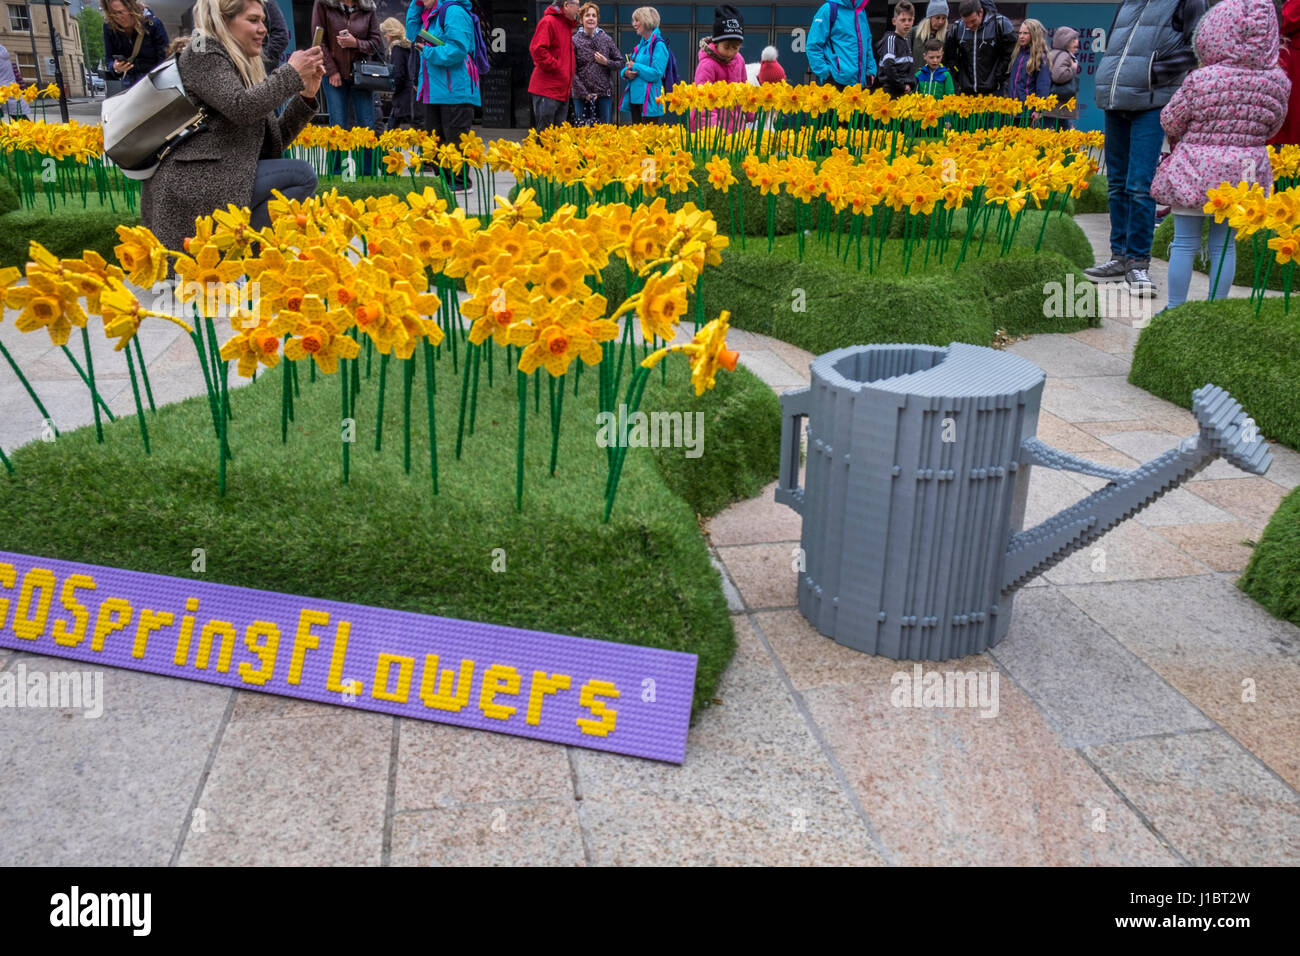 Display of Lego Daffodils in Hull City of Culture 2017 Stock Photo